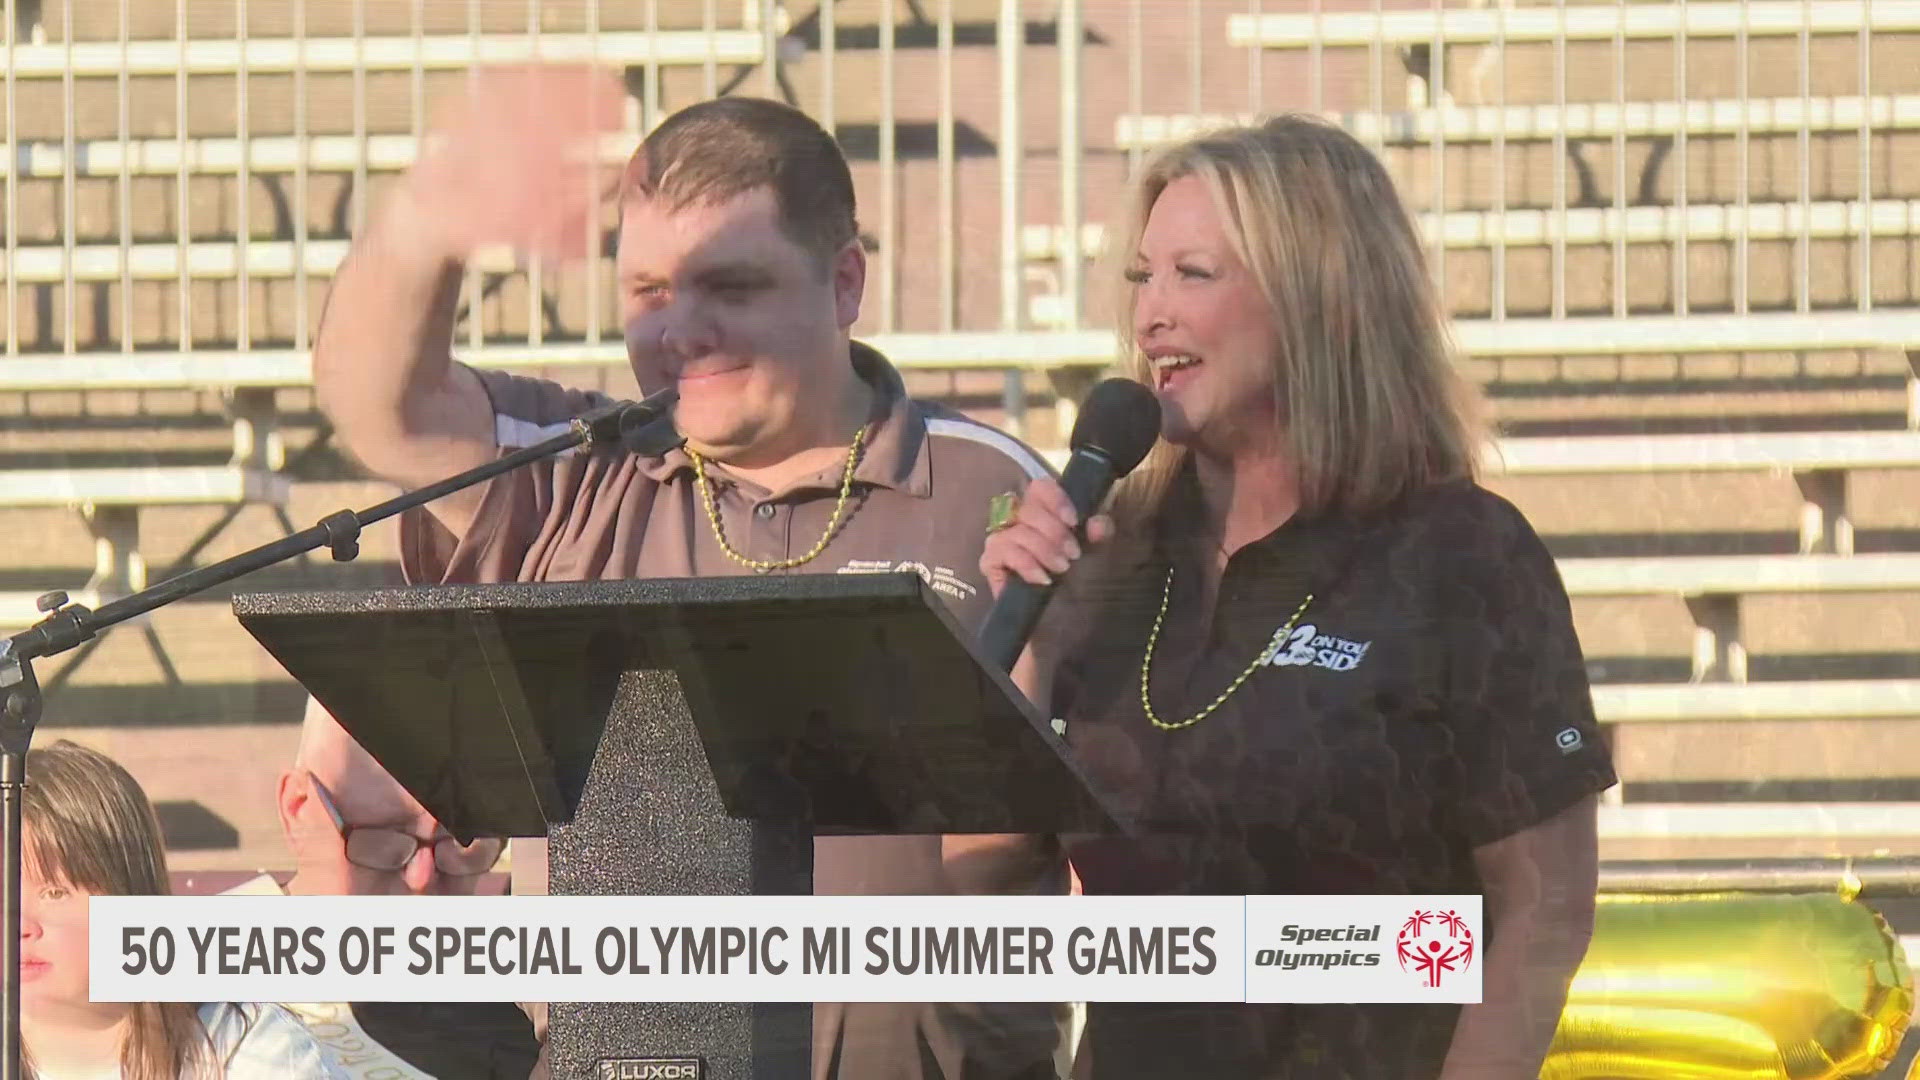 The State Summer Games are SOMI's largest annual event. They began in 1972.